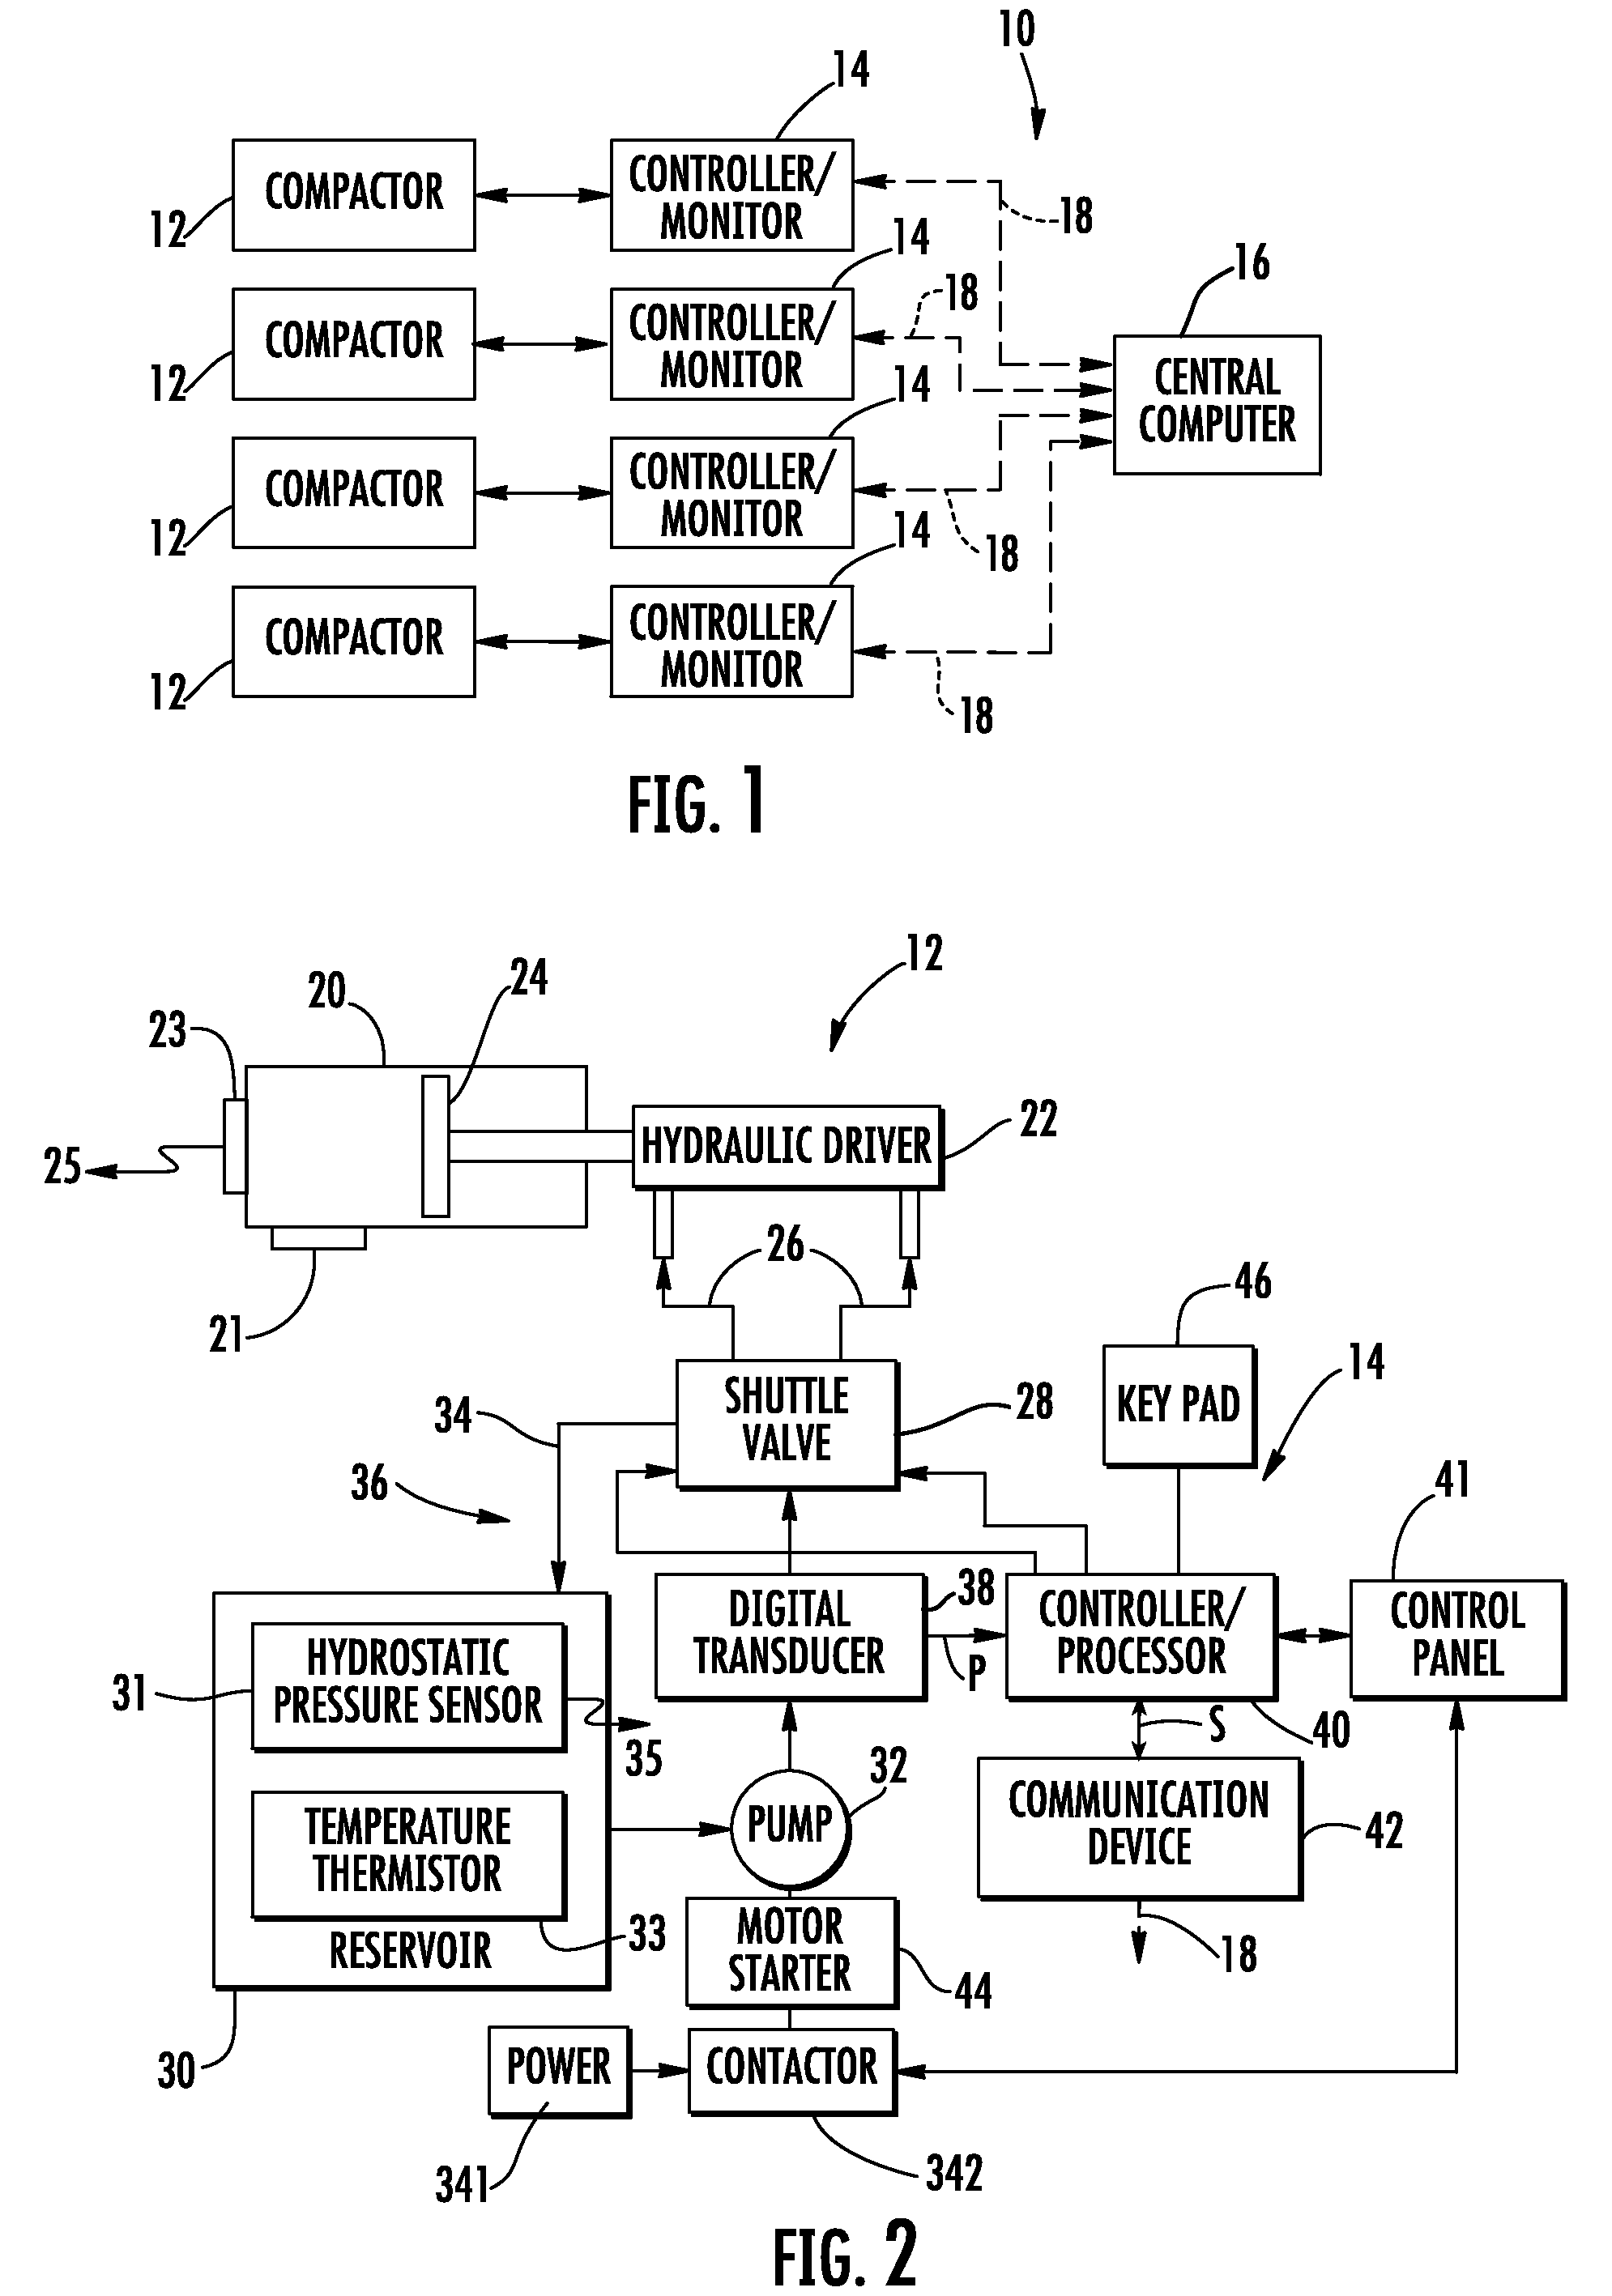 System and method for controlling compactor systems